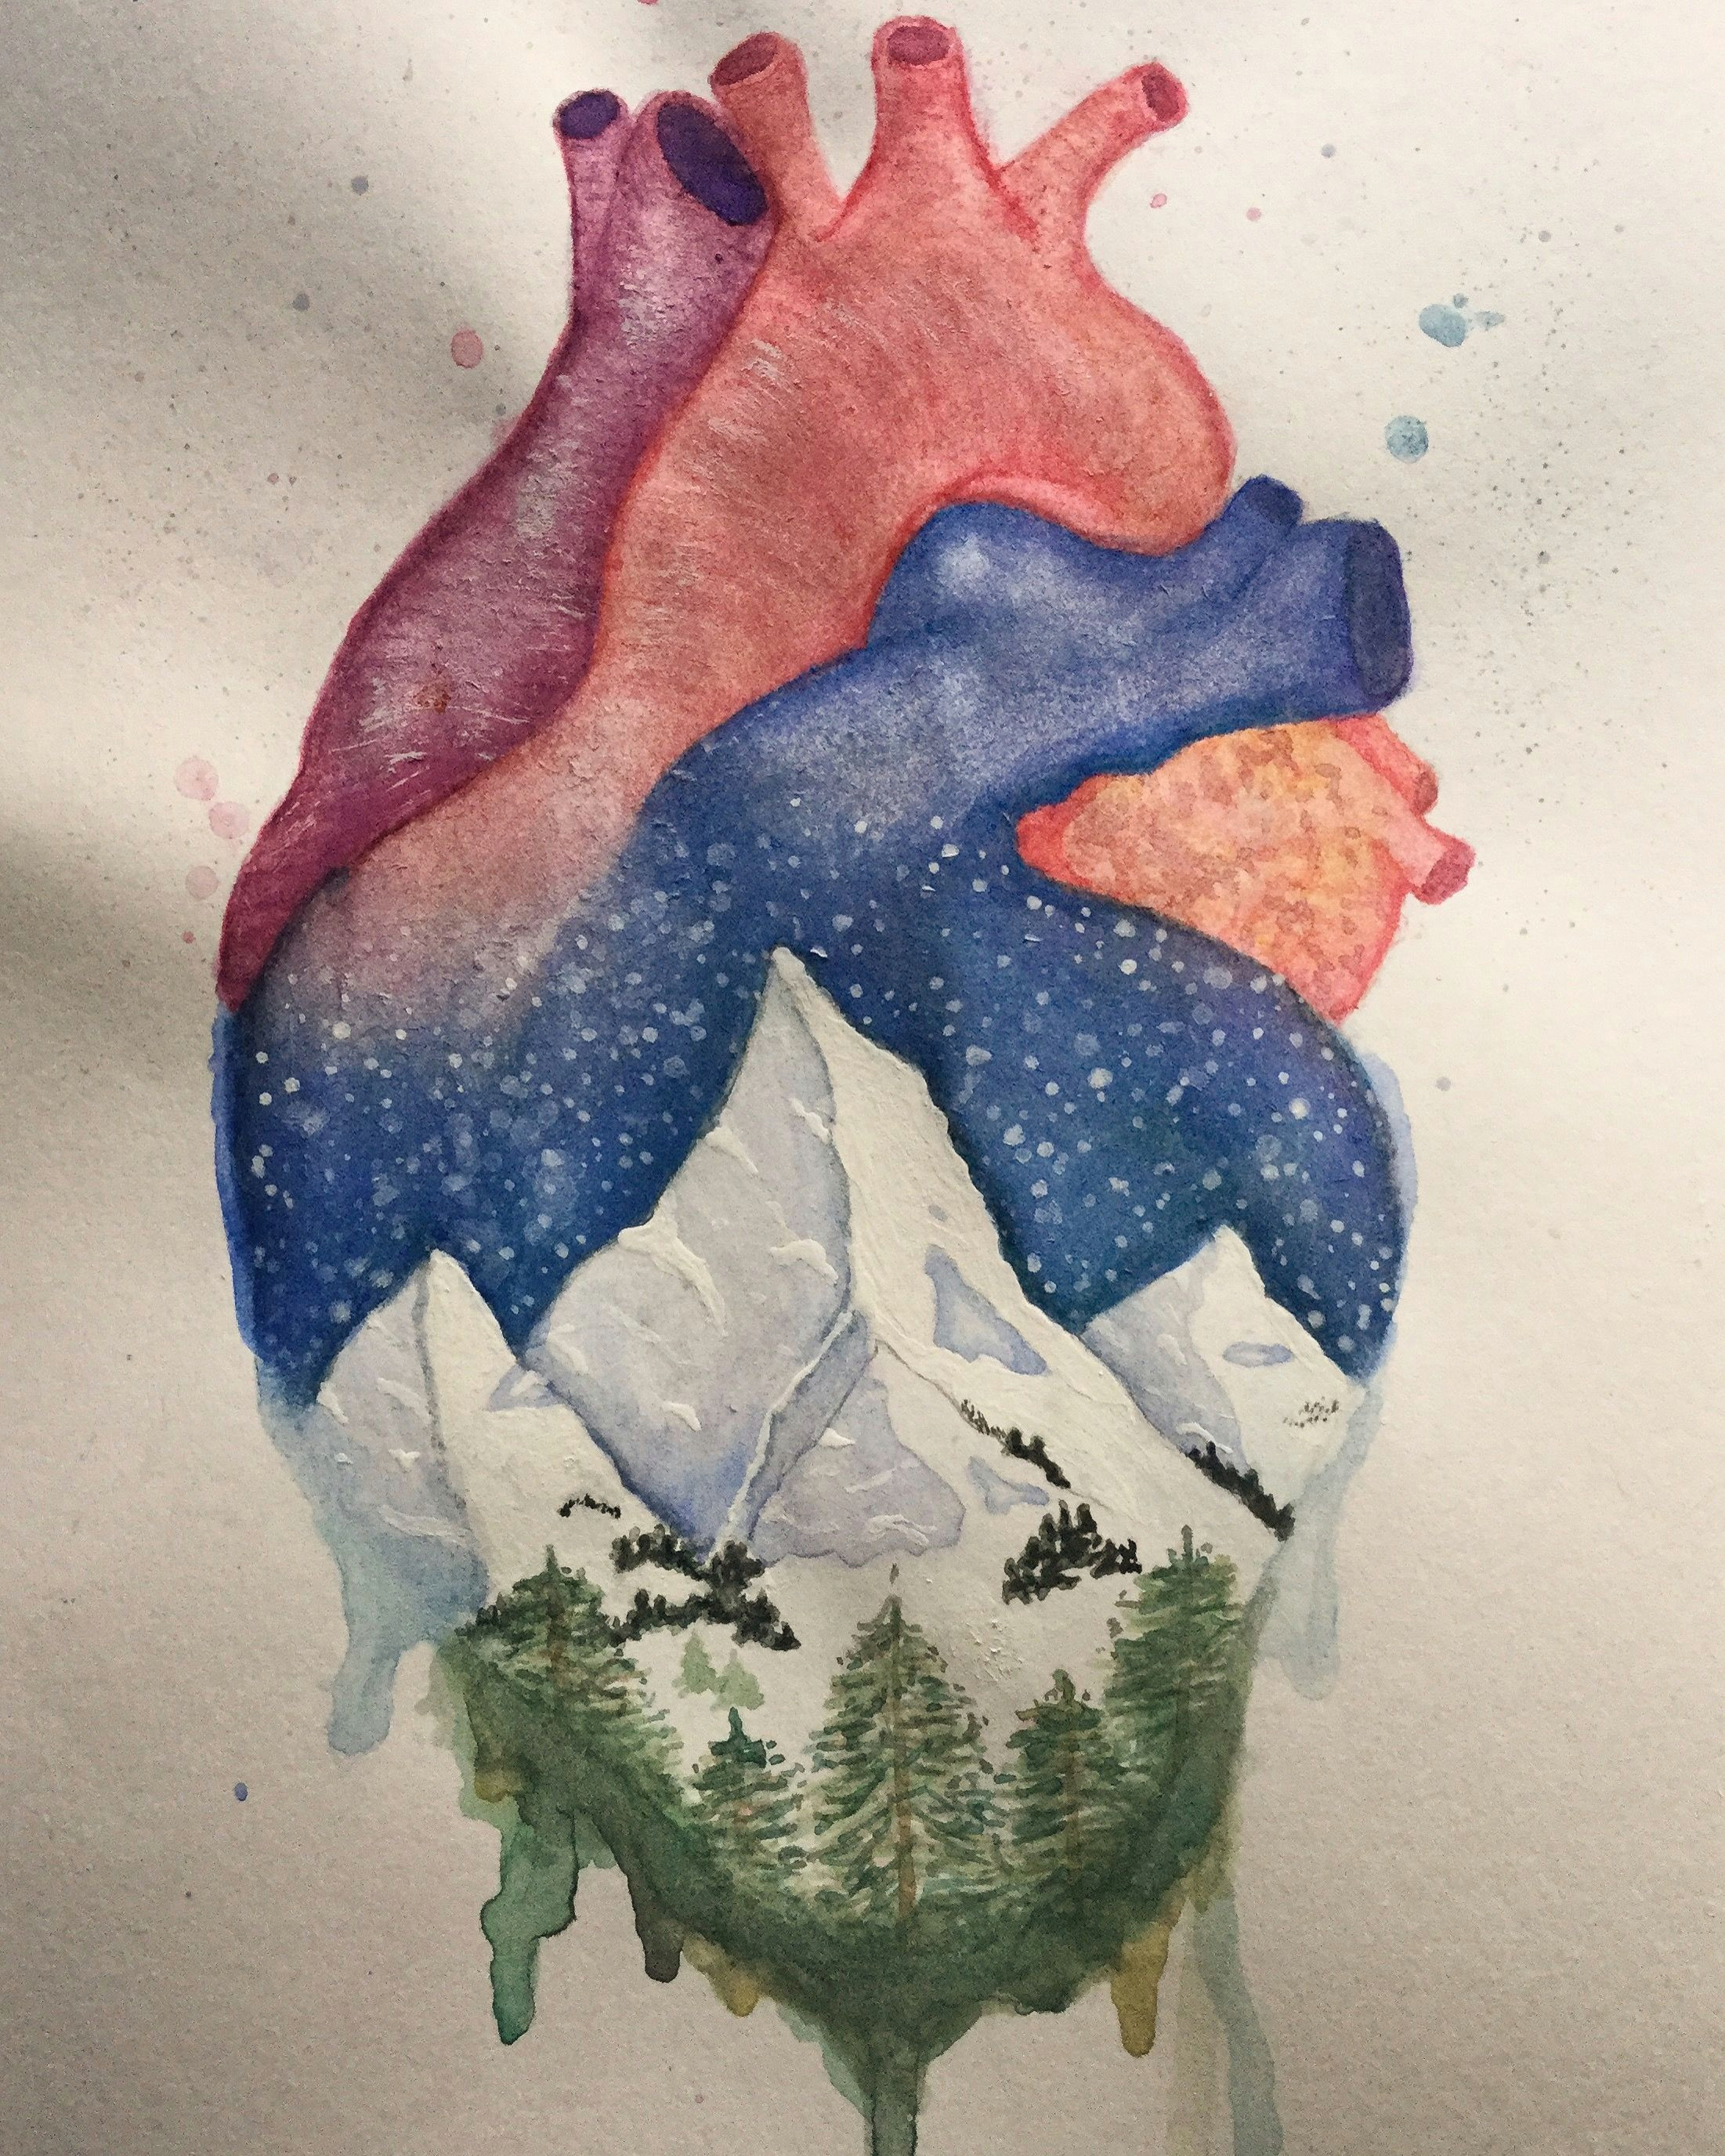 Drawing Ideas to Paint Anatomical Heart and Winter Mountain Landscape Watercolor Painting